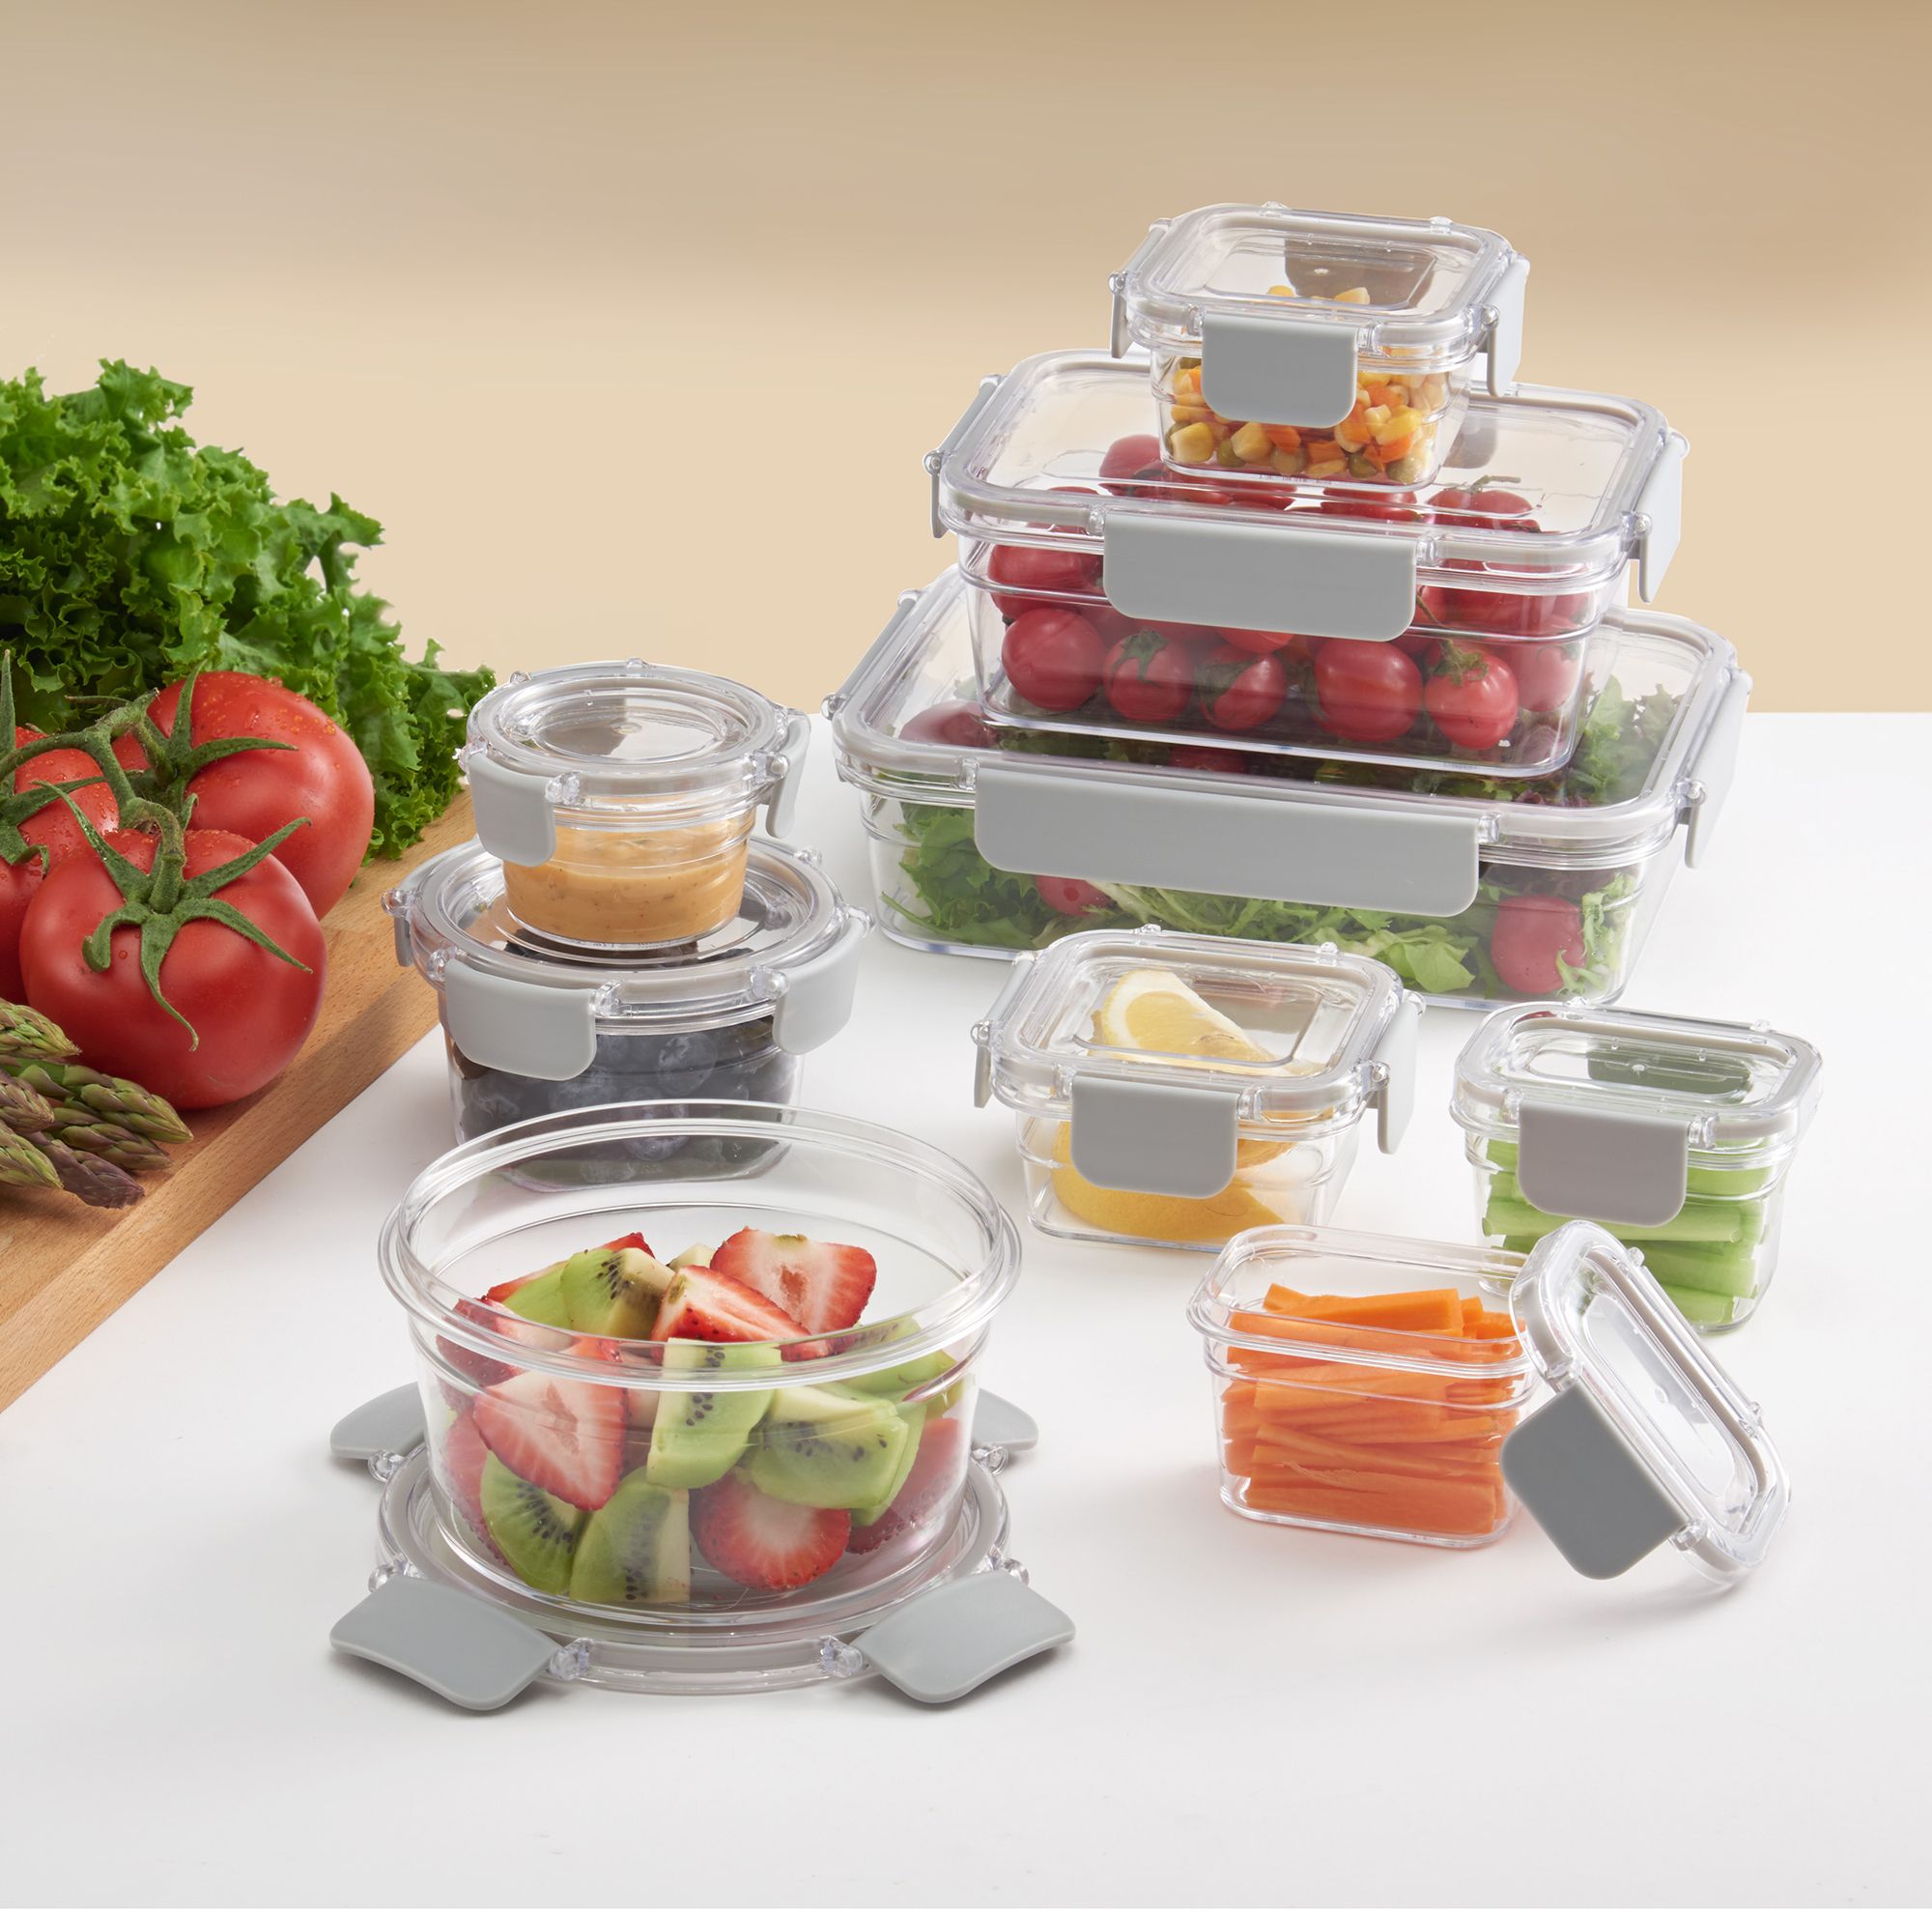 Mainstays Tritan Variety Set of 9 Food Storage Containers with Light Grey Clasps (18 Pc in Total) - image 1 of 5